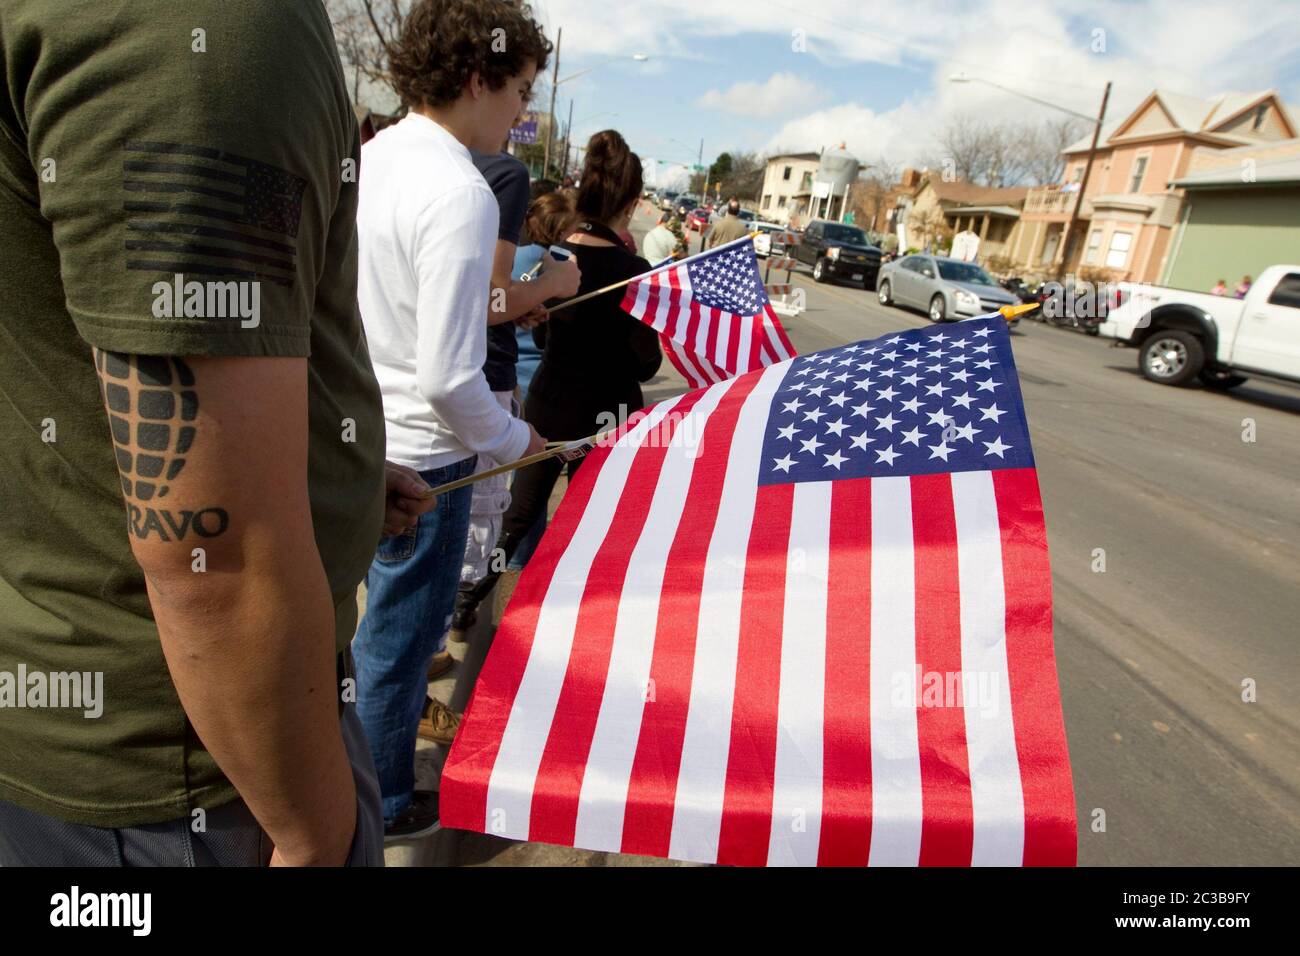 Austin Texas USA, February 12, 2013: Mourners line the street to pay respects to former Navy SEAL Chris Kyle as his funeral cortege passes on its way to his burial at the Texas State Cemetery. Kyle served four tours of duty as a sniper during the Iraq war, and wrote a popular book about his experiences there. He was fatally shot by a fellow Iraq war veteran at a gun range in Glen Rose, Texas on February 2. ©Marjorie Kamys Cotera/Daemmrich Photography Stock Photo